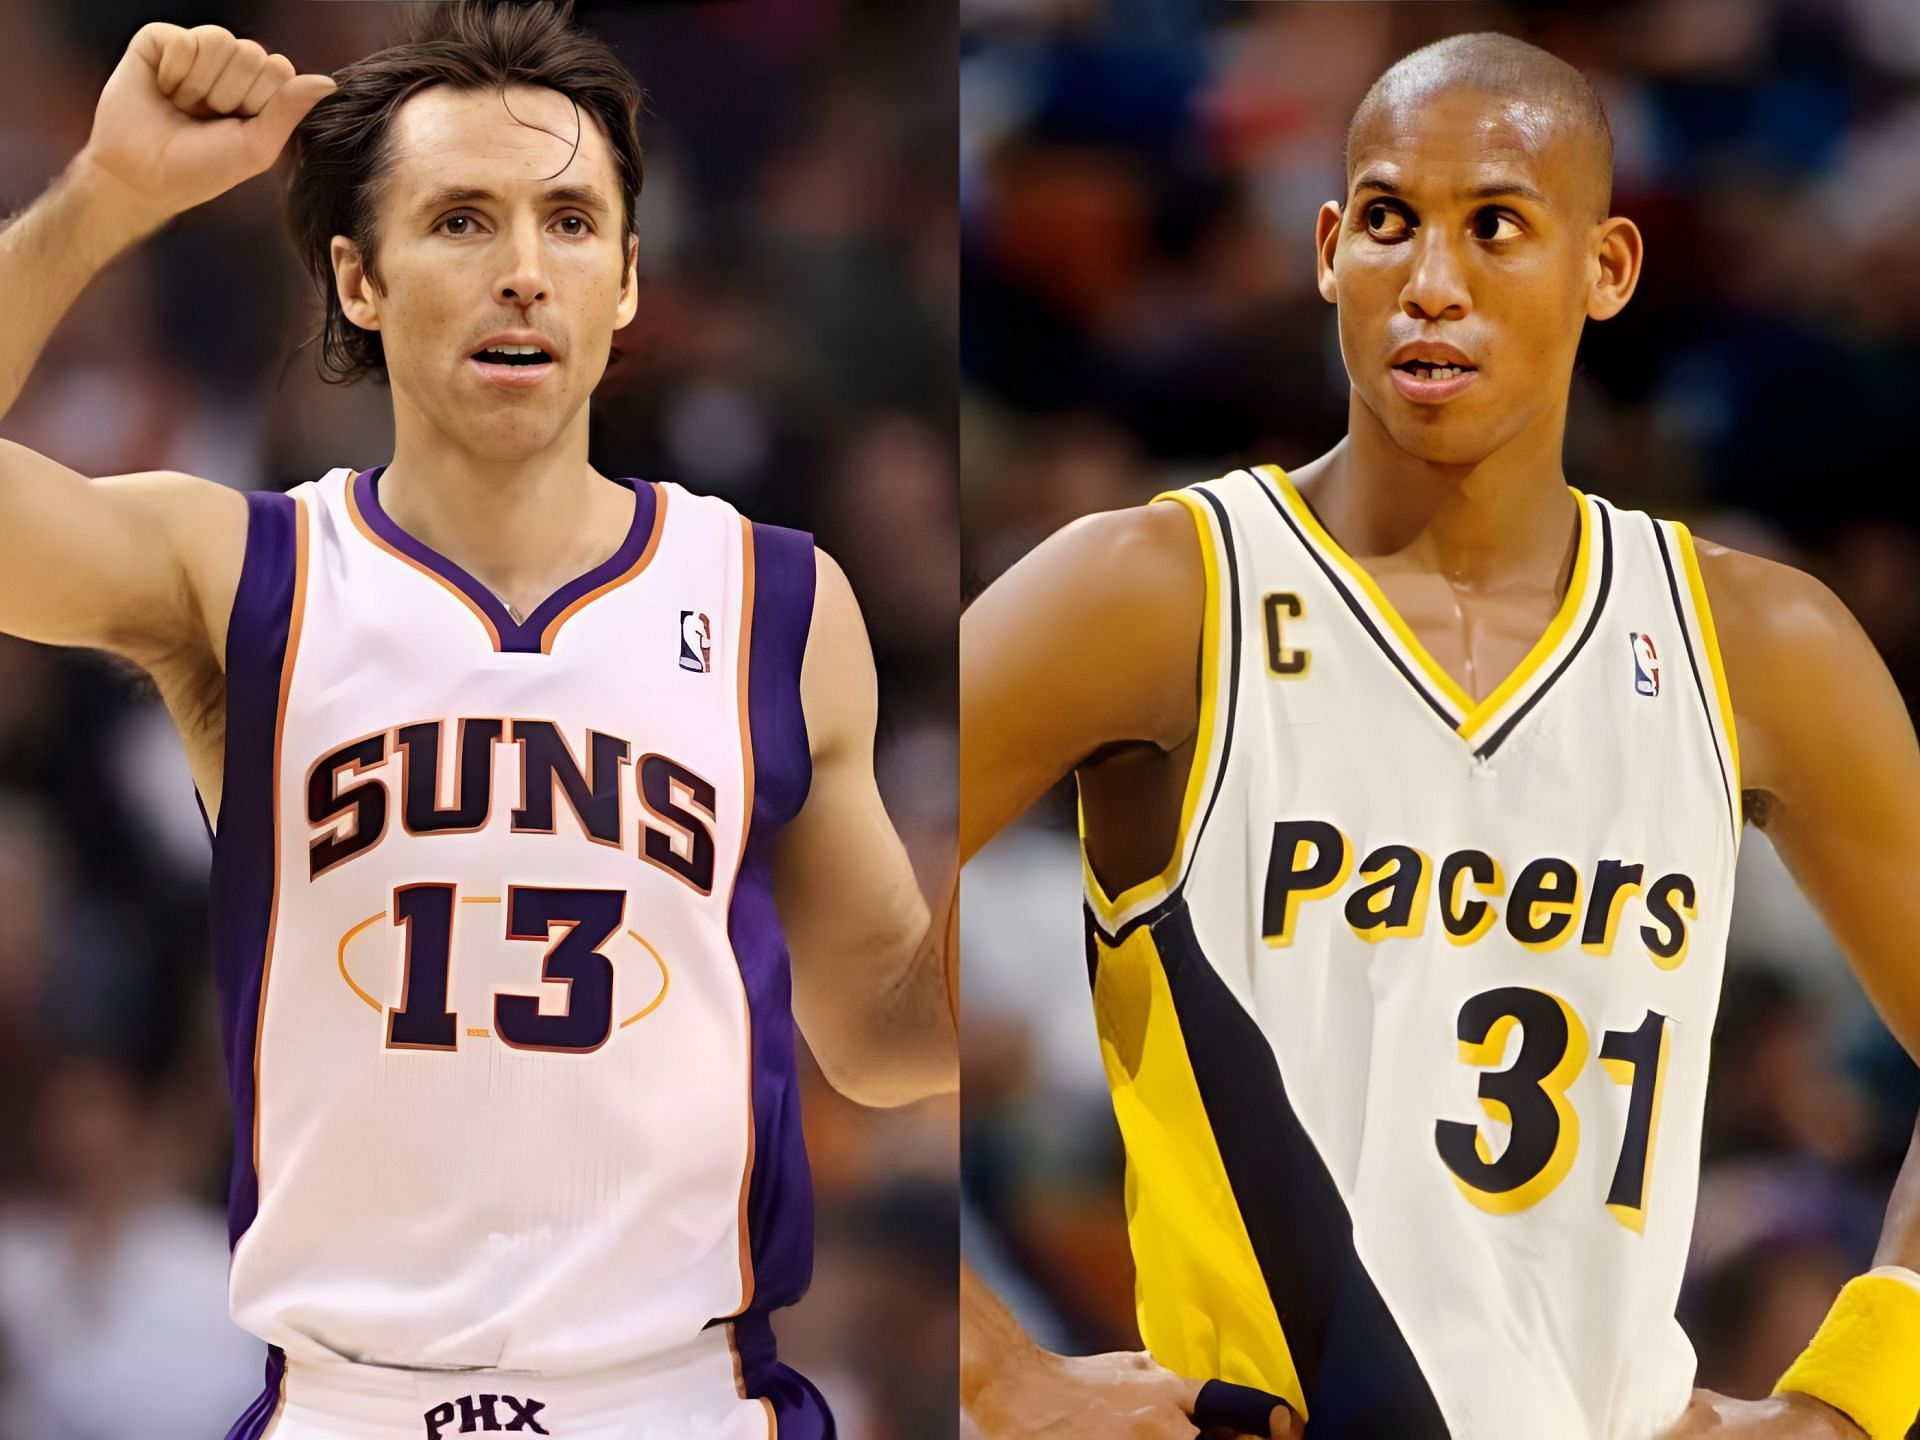 Phoenix Suns and Indiana Pacers legends Steve Nash and Reggie Miller